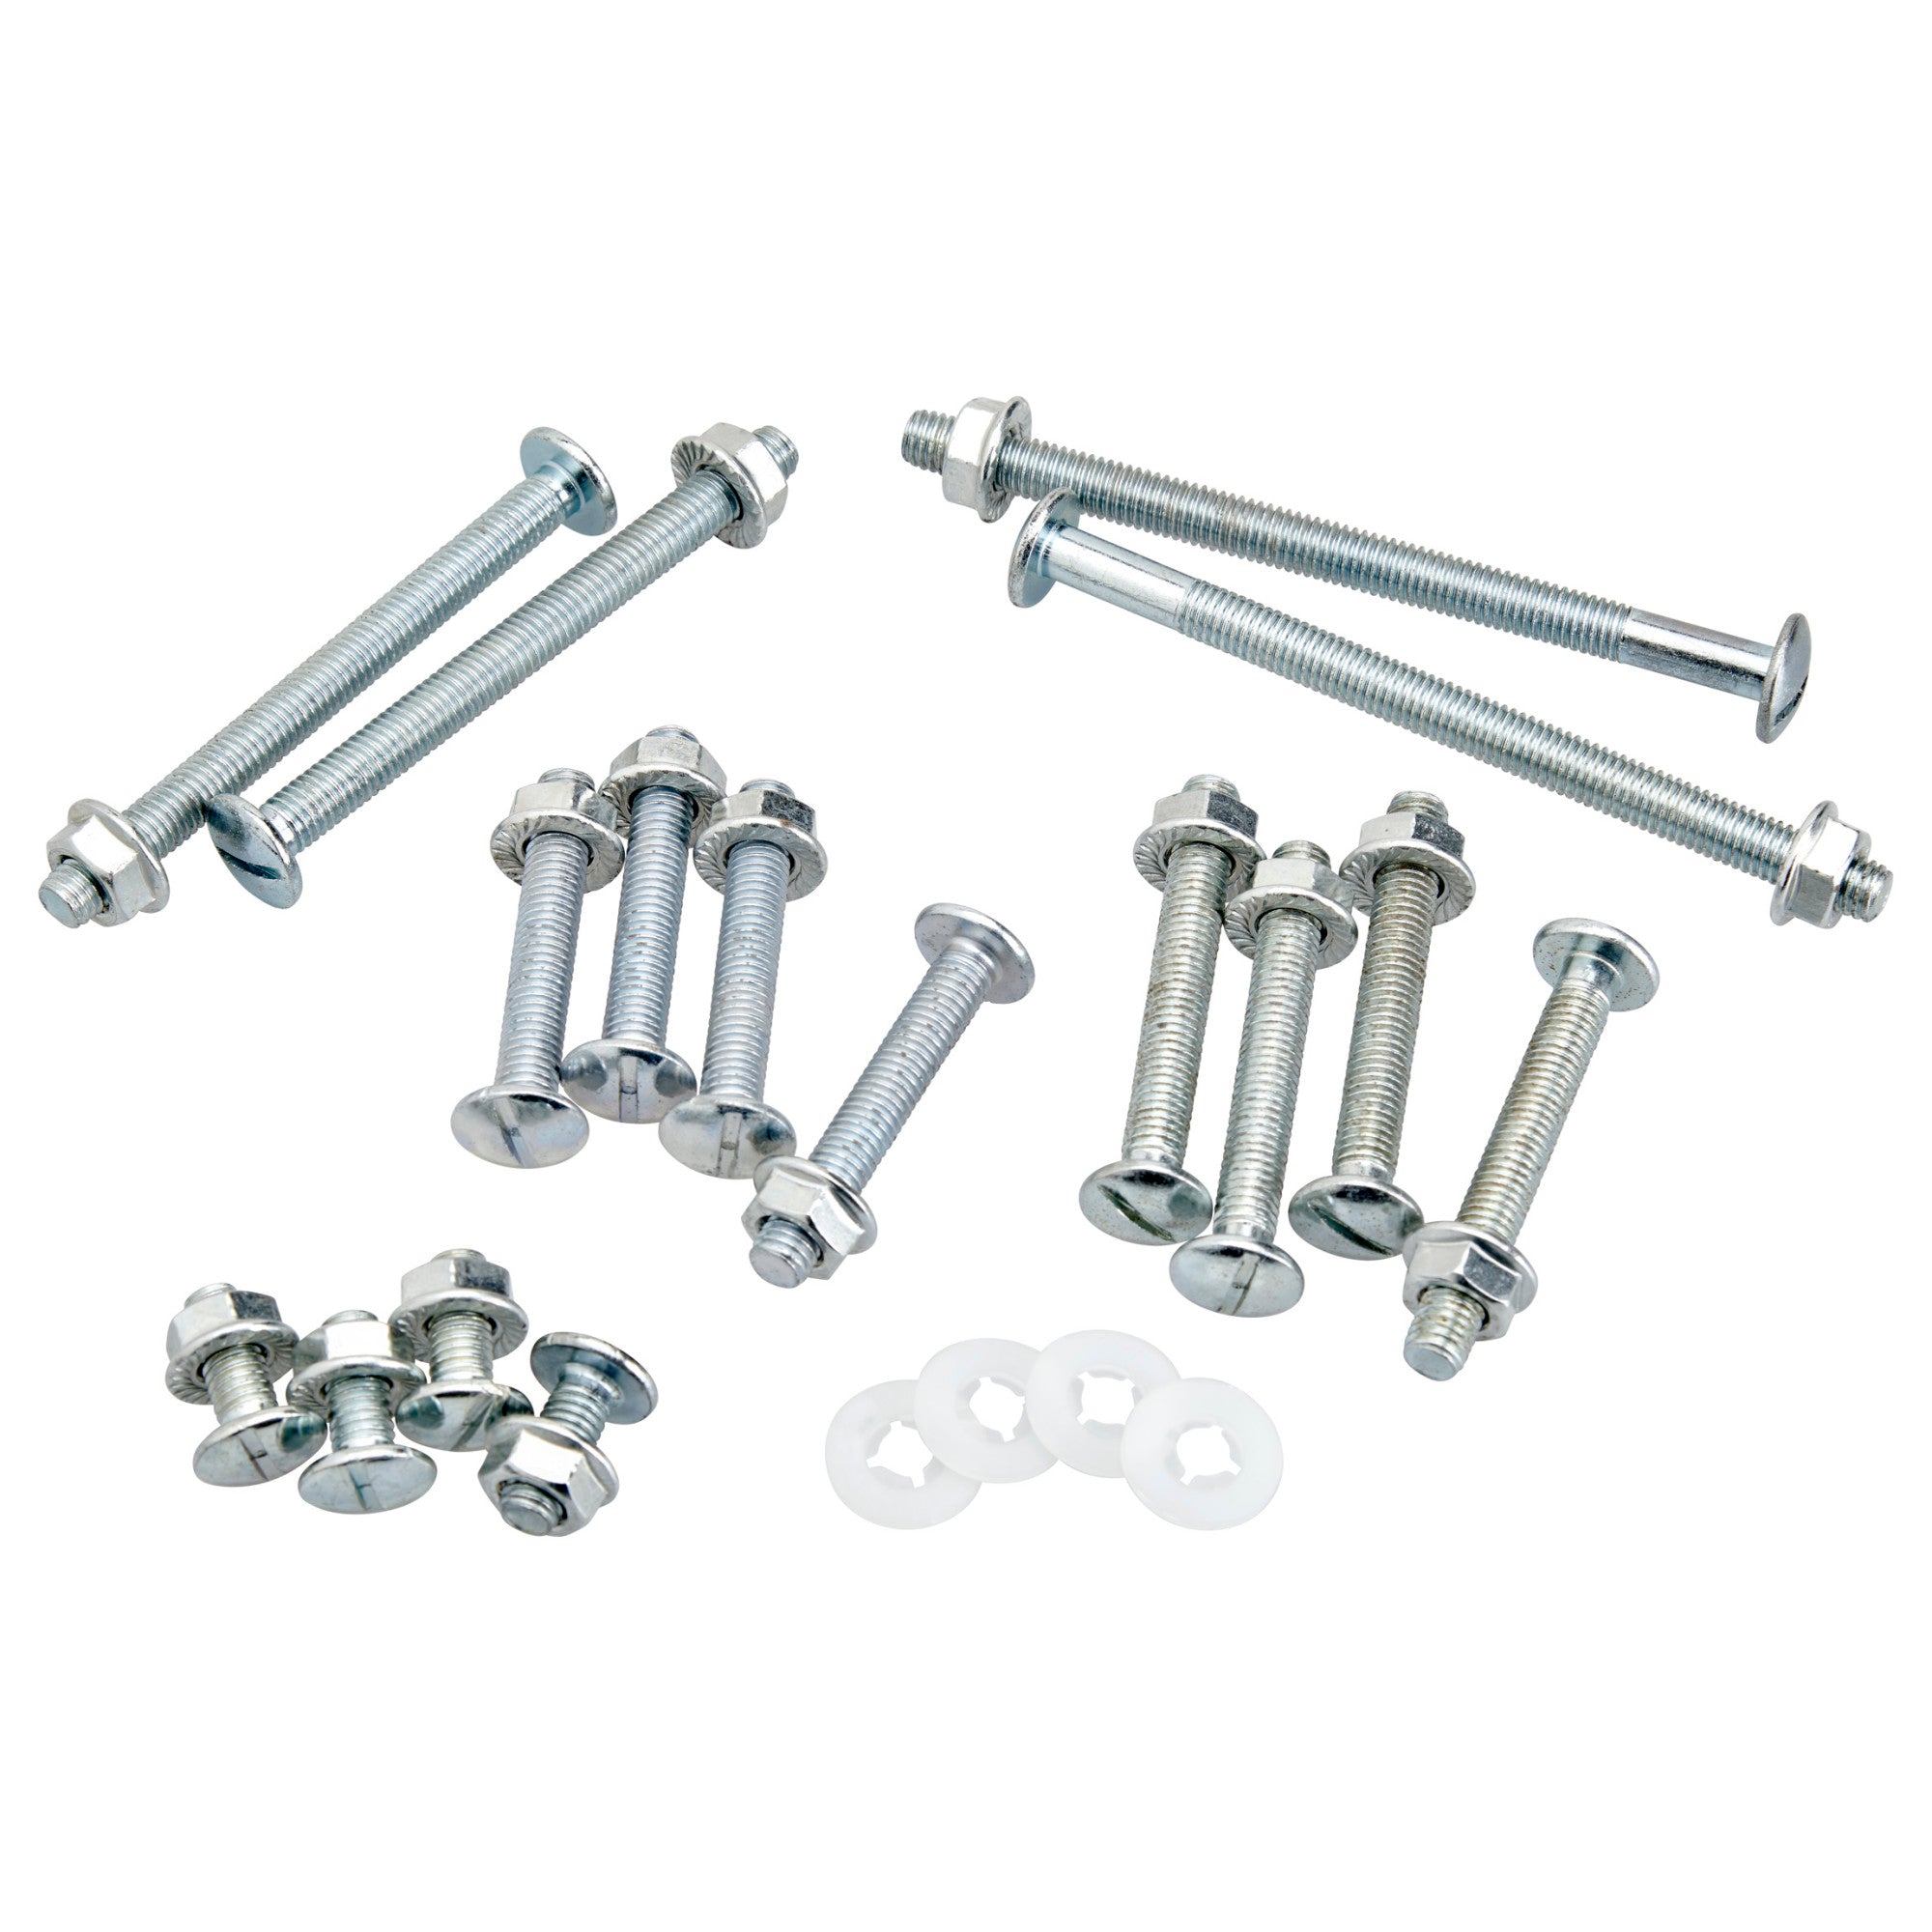 Replacement Hardware Pack for Steel Wheelbarrow